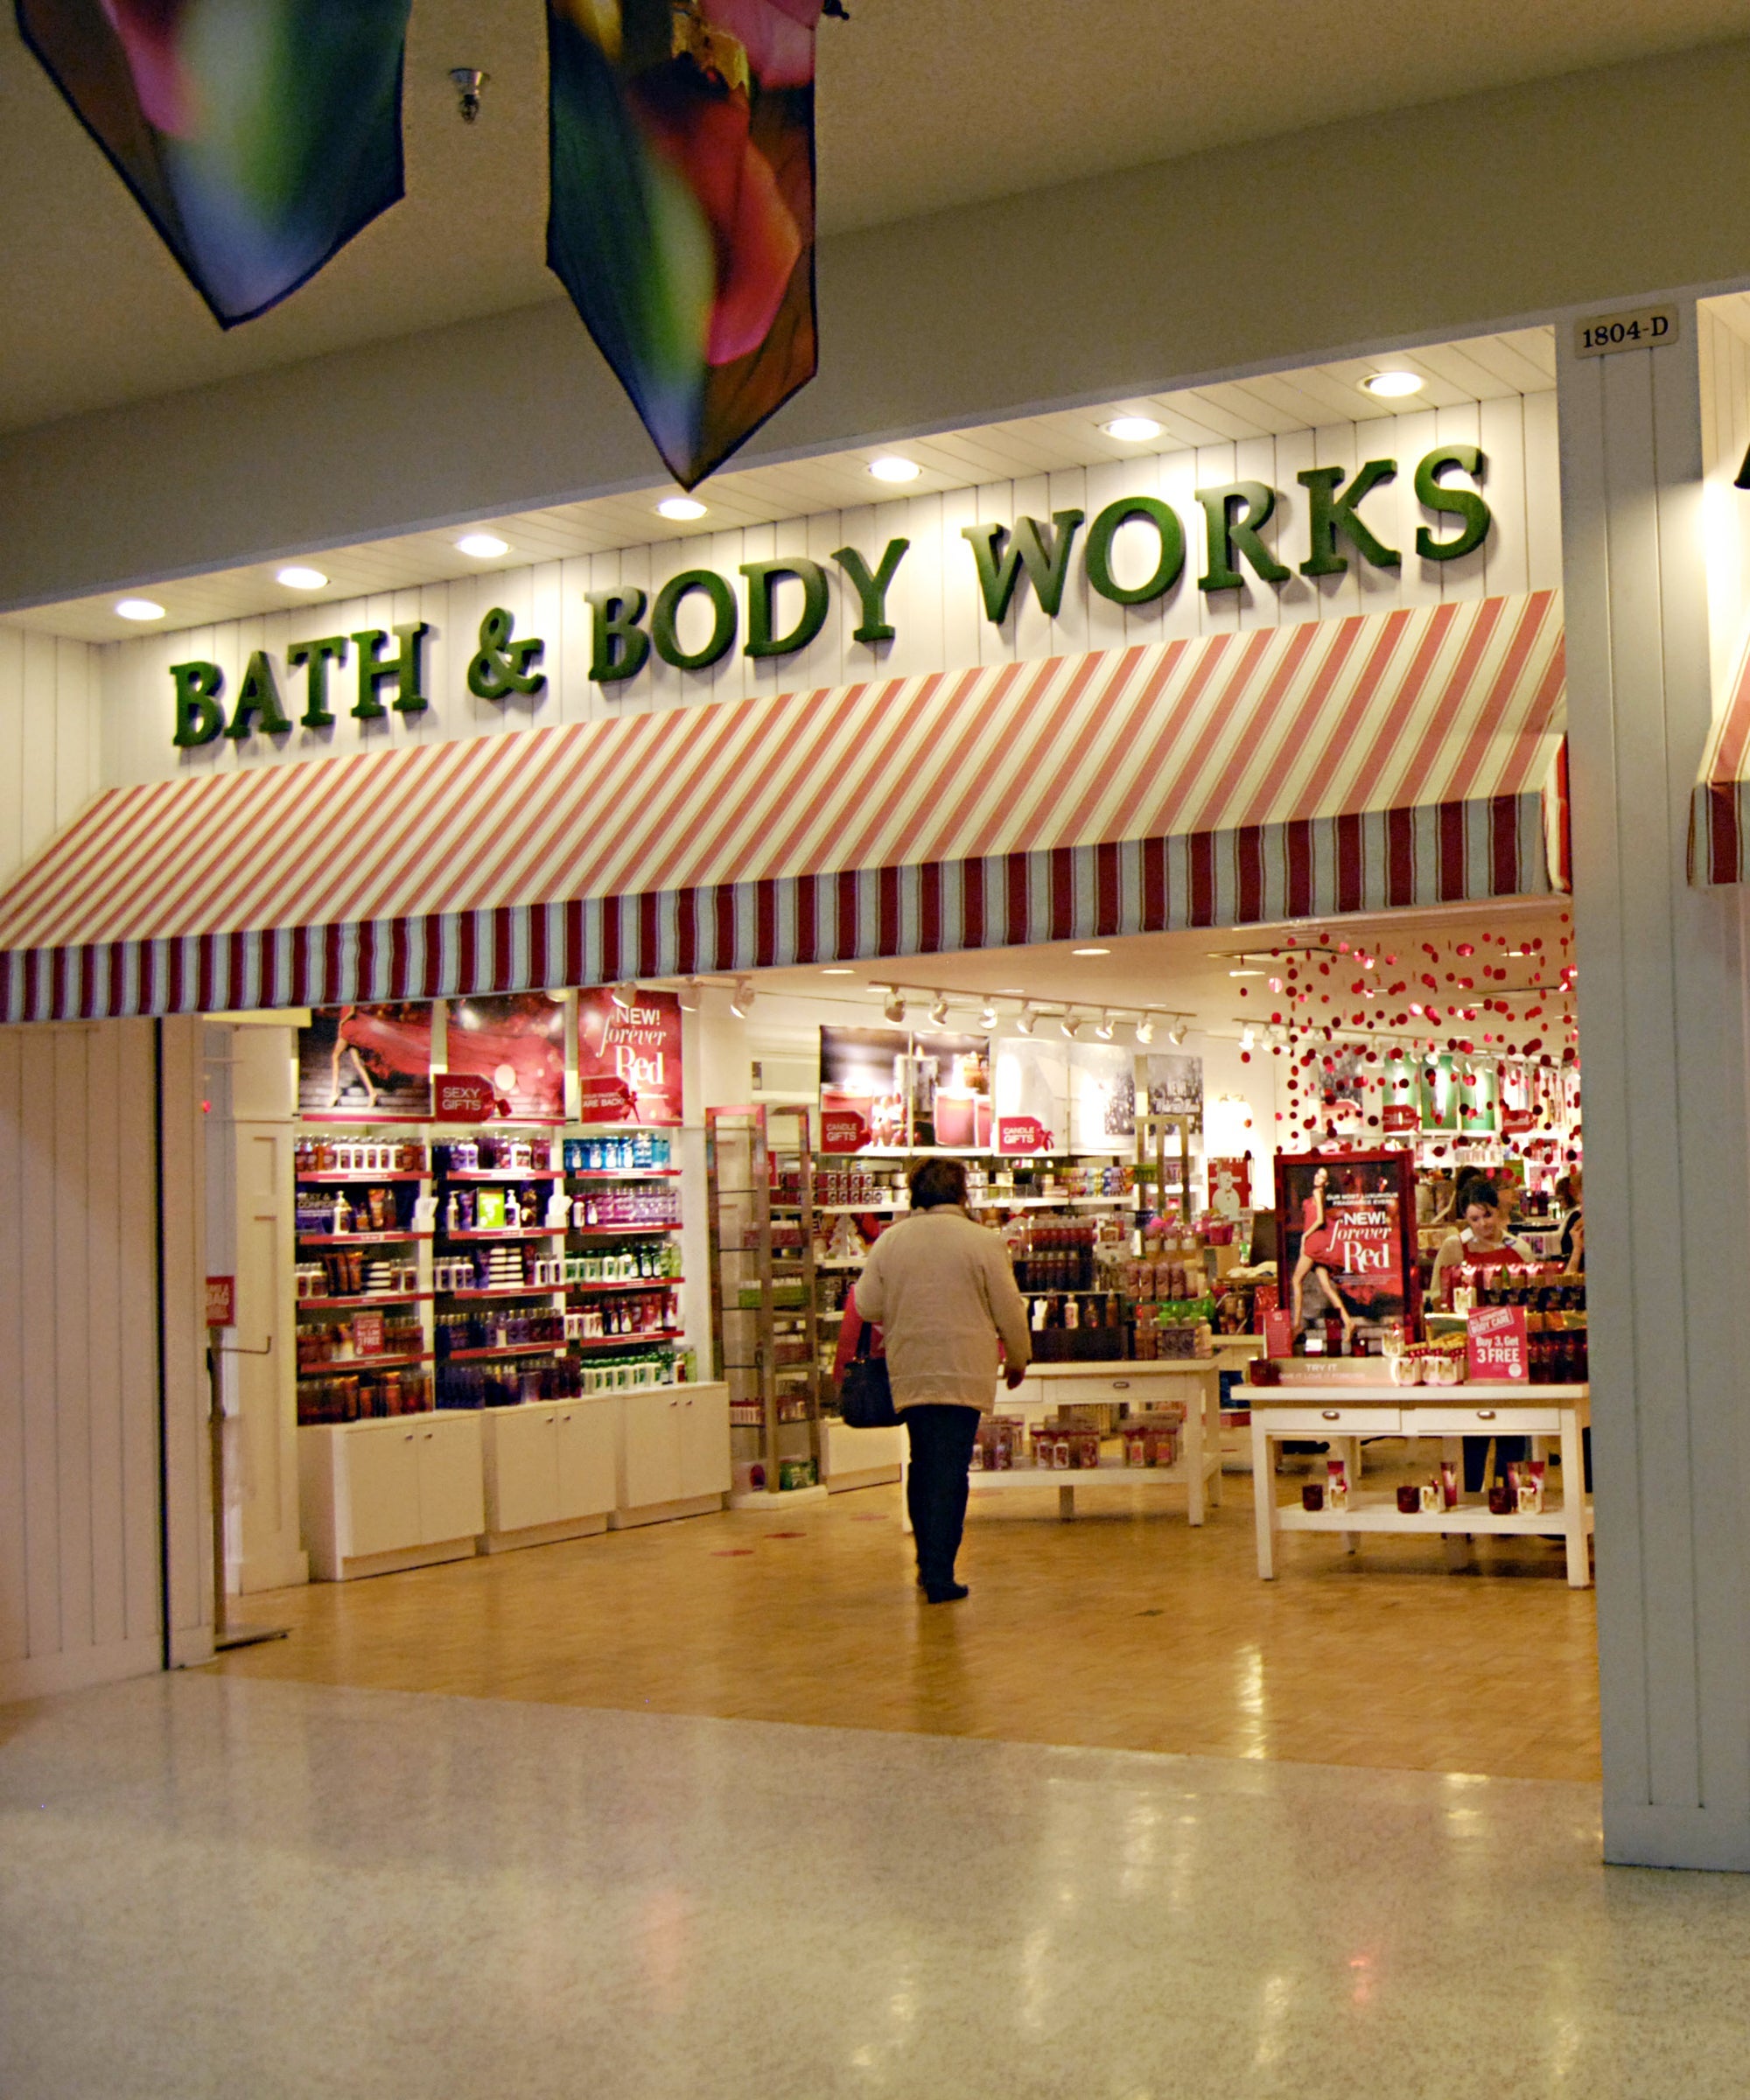 bath and body works cyber monday